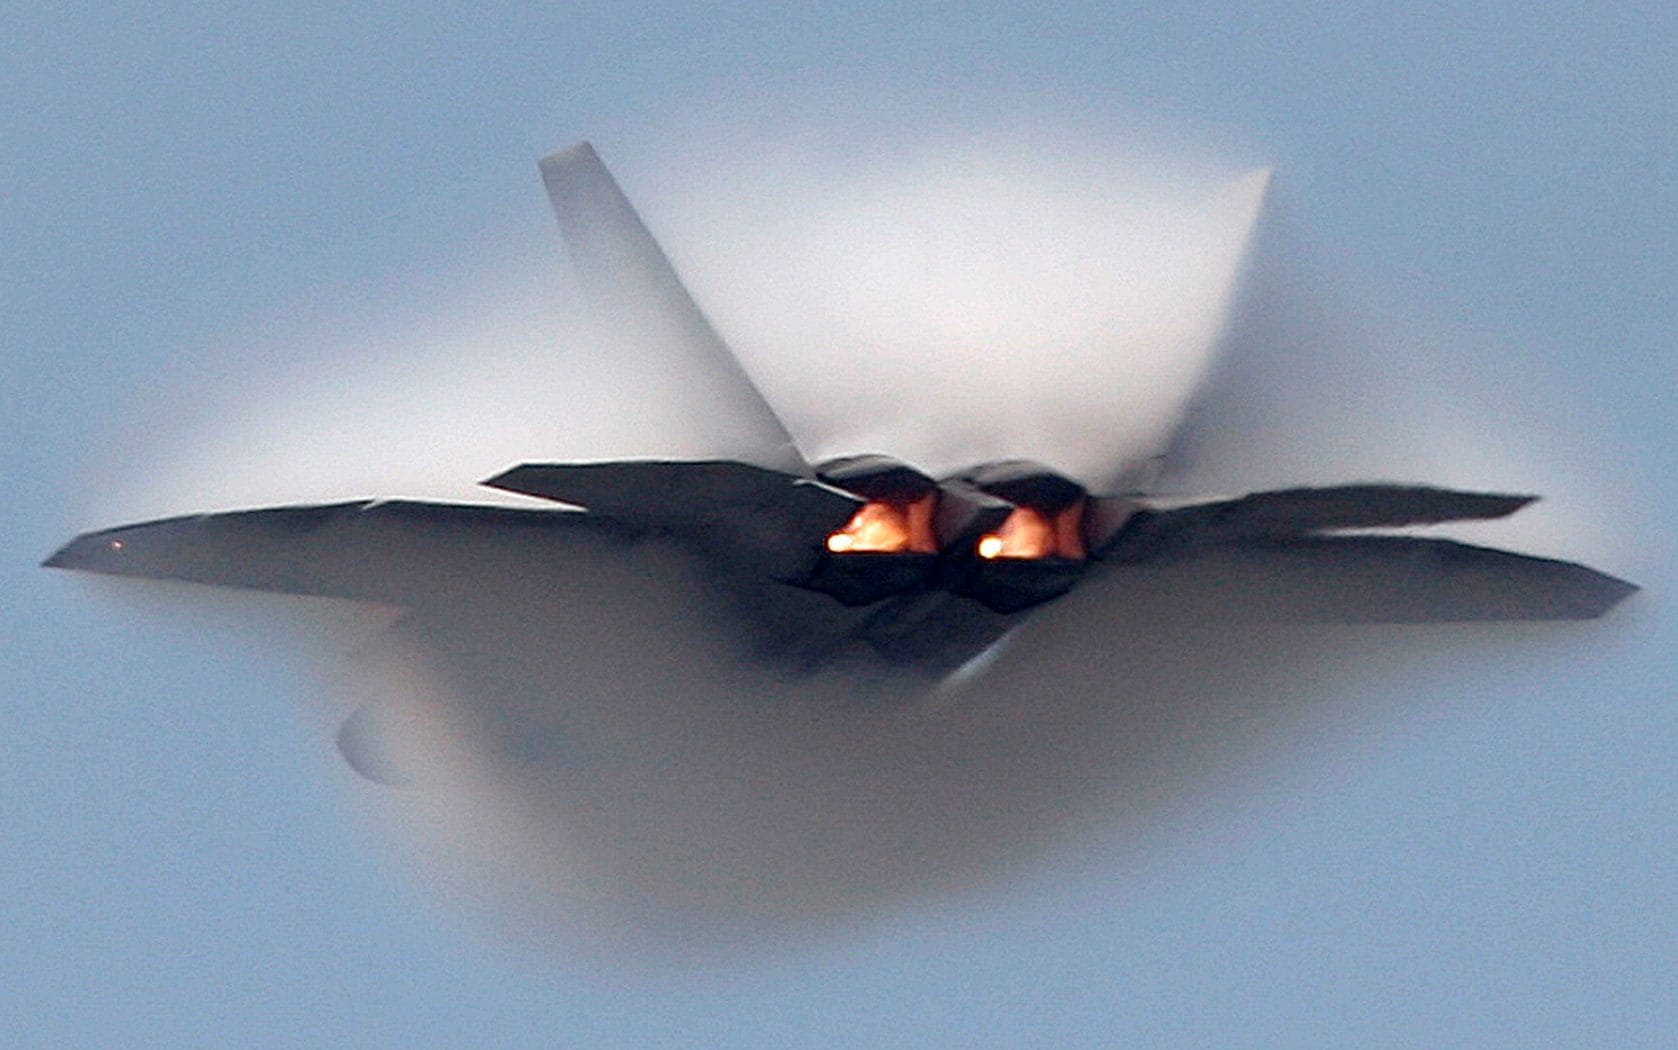 getting ready for war with china: the world’s greatest fighter jet gets an upgrade